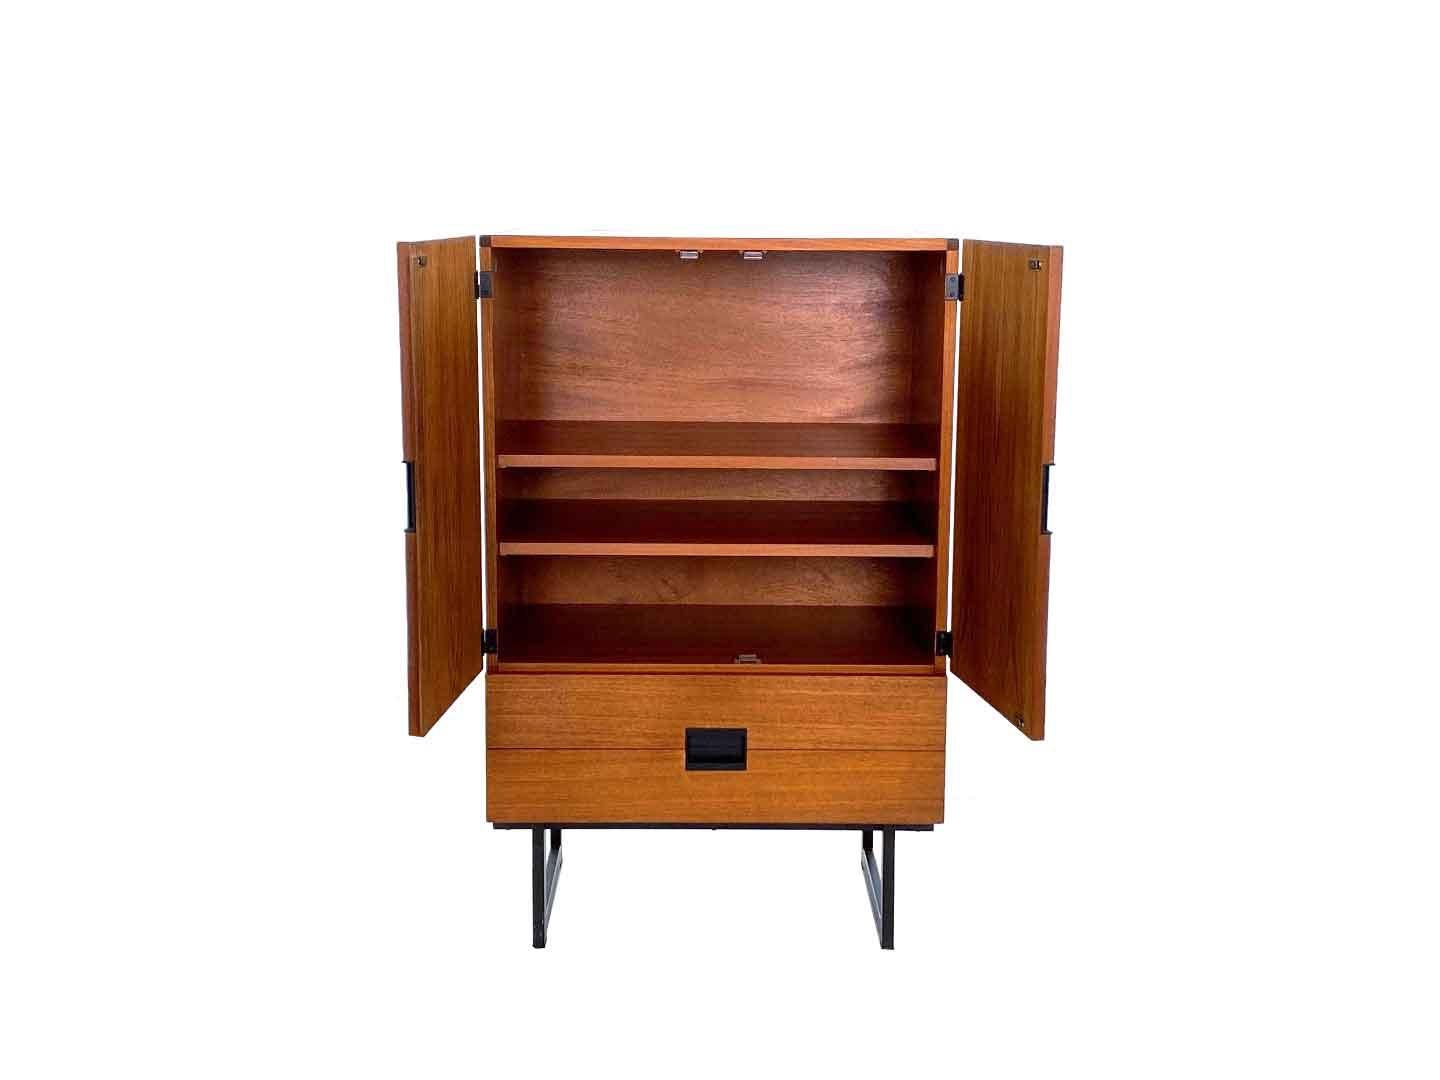 Very particularly iconic vintage CU03 cabinet by Cees Braakman, produced by Pastoe in 1958. The cabinet belongs to the Japanese series of Pastoe and is a real Dutch design classic. The cupboard has two drawers, two doors and two shelves. through the